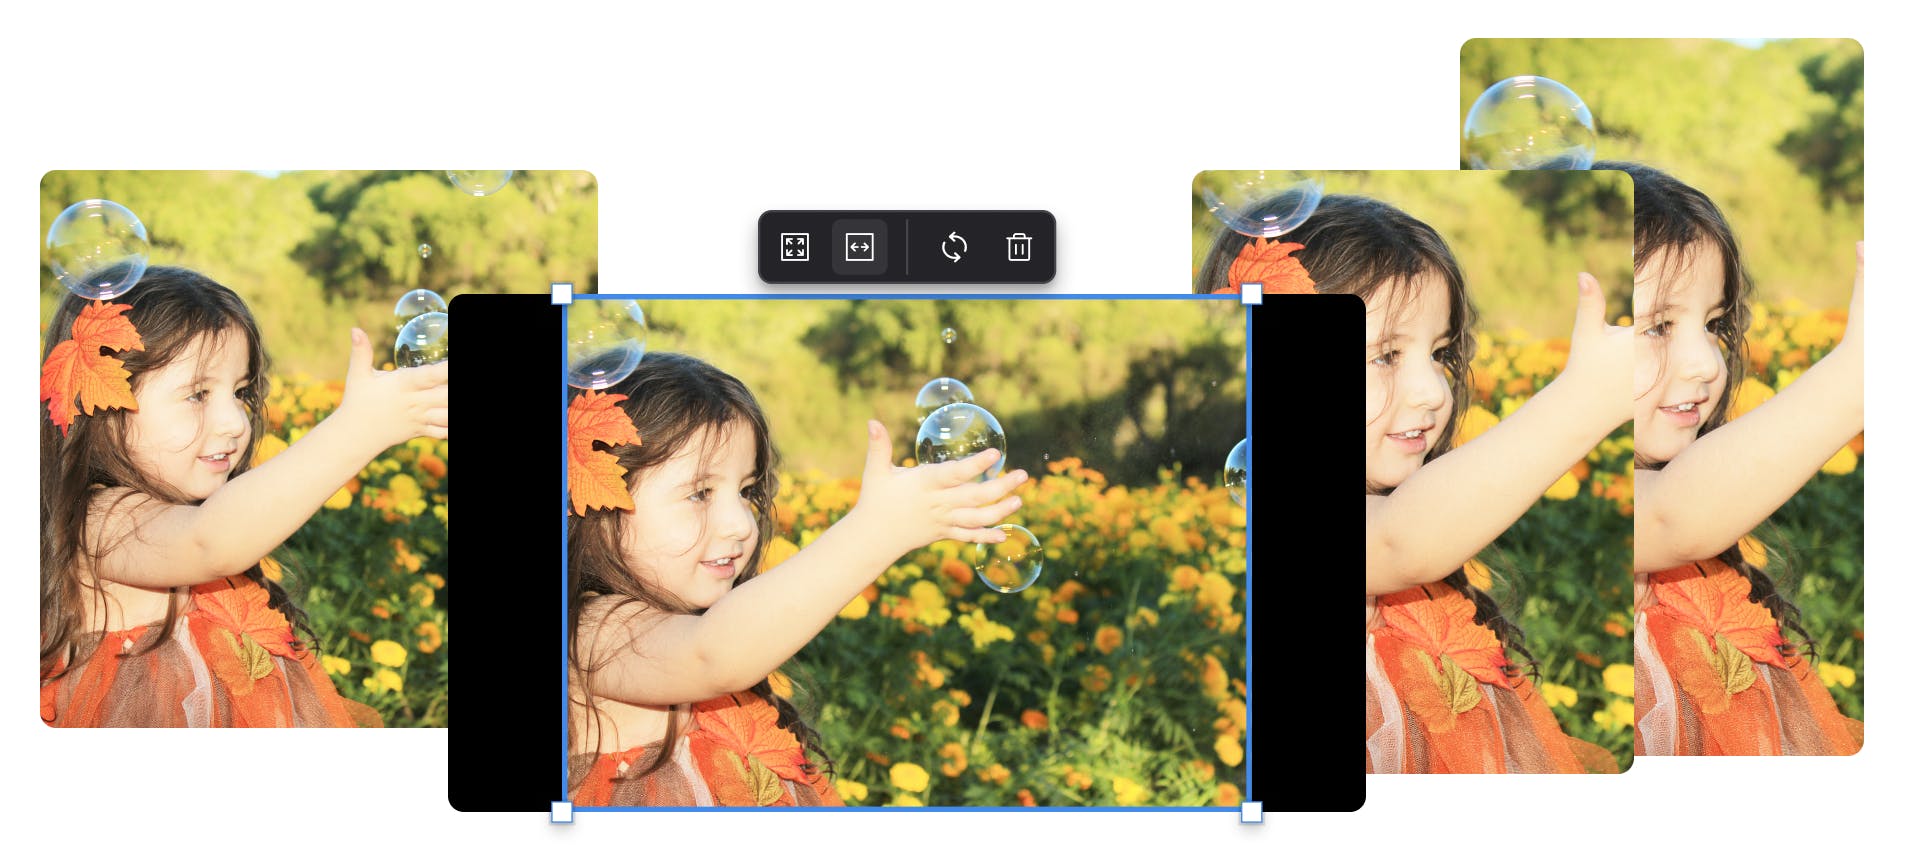 screenshot of little girl playing with soap bubbles in the flower field and a resizing tool shown